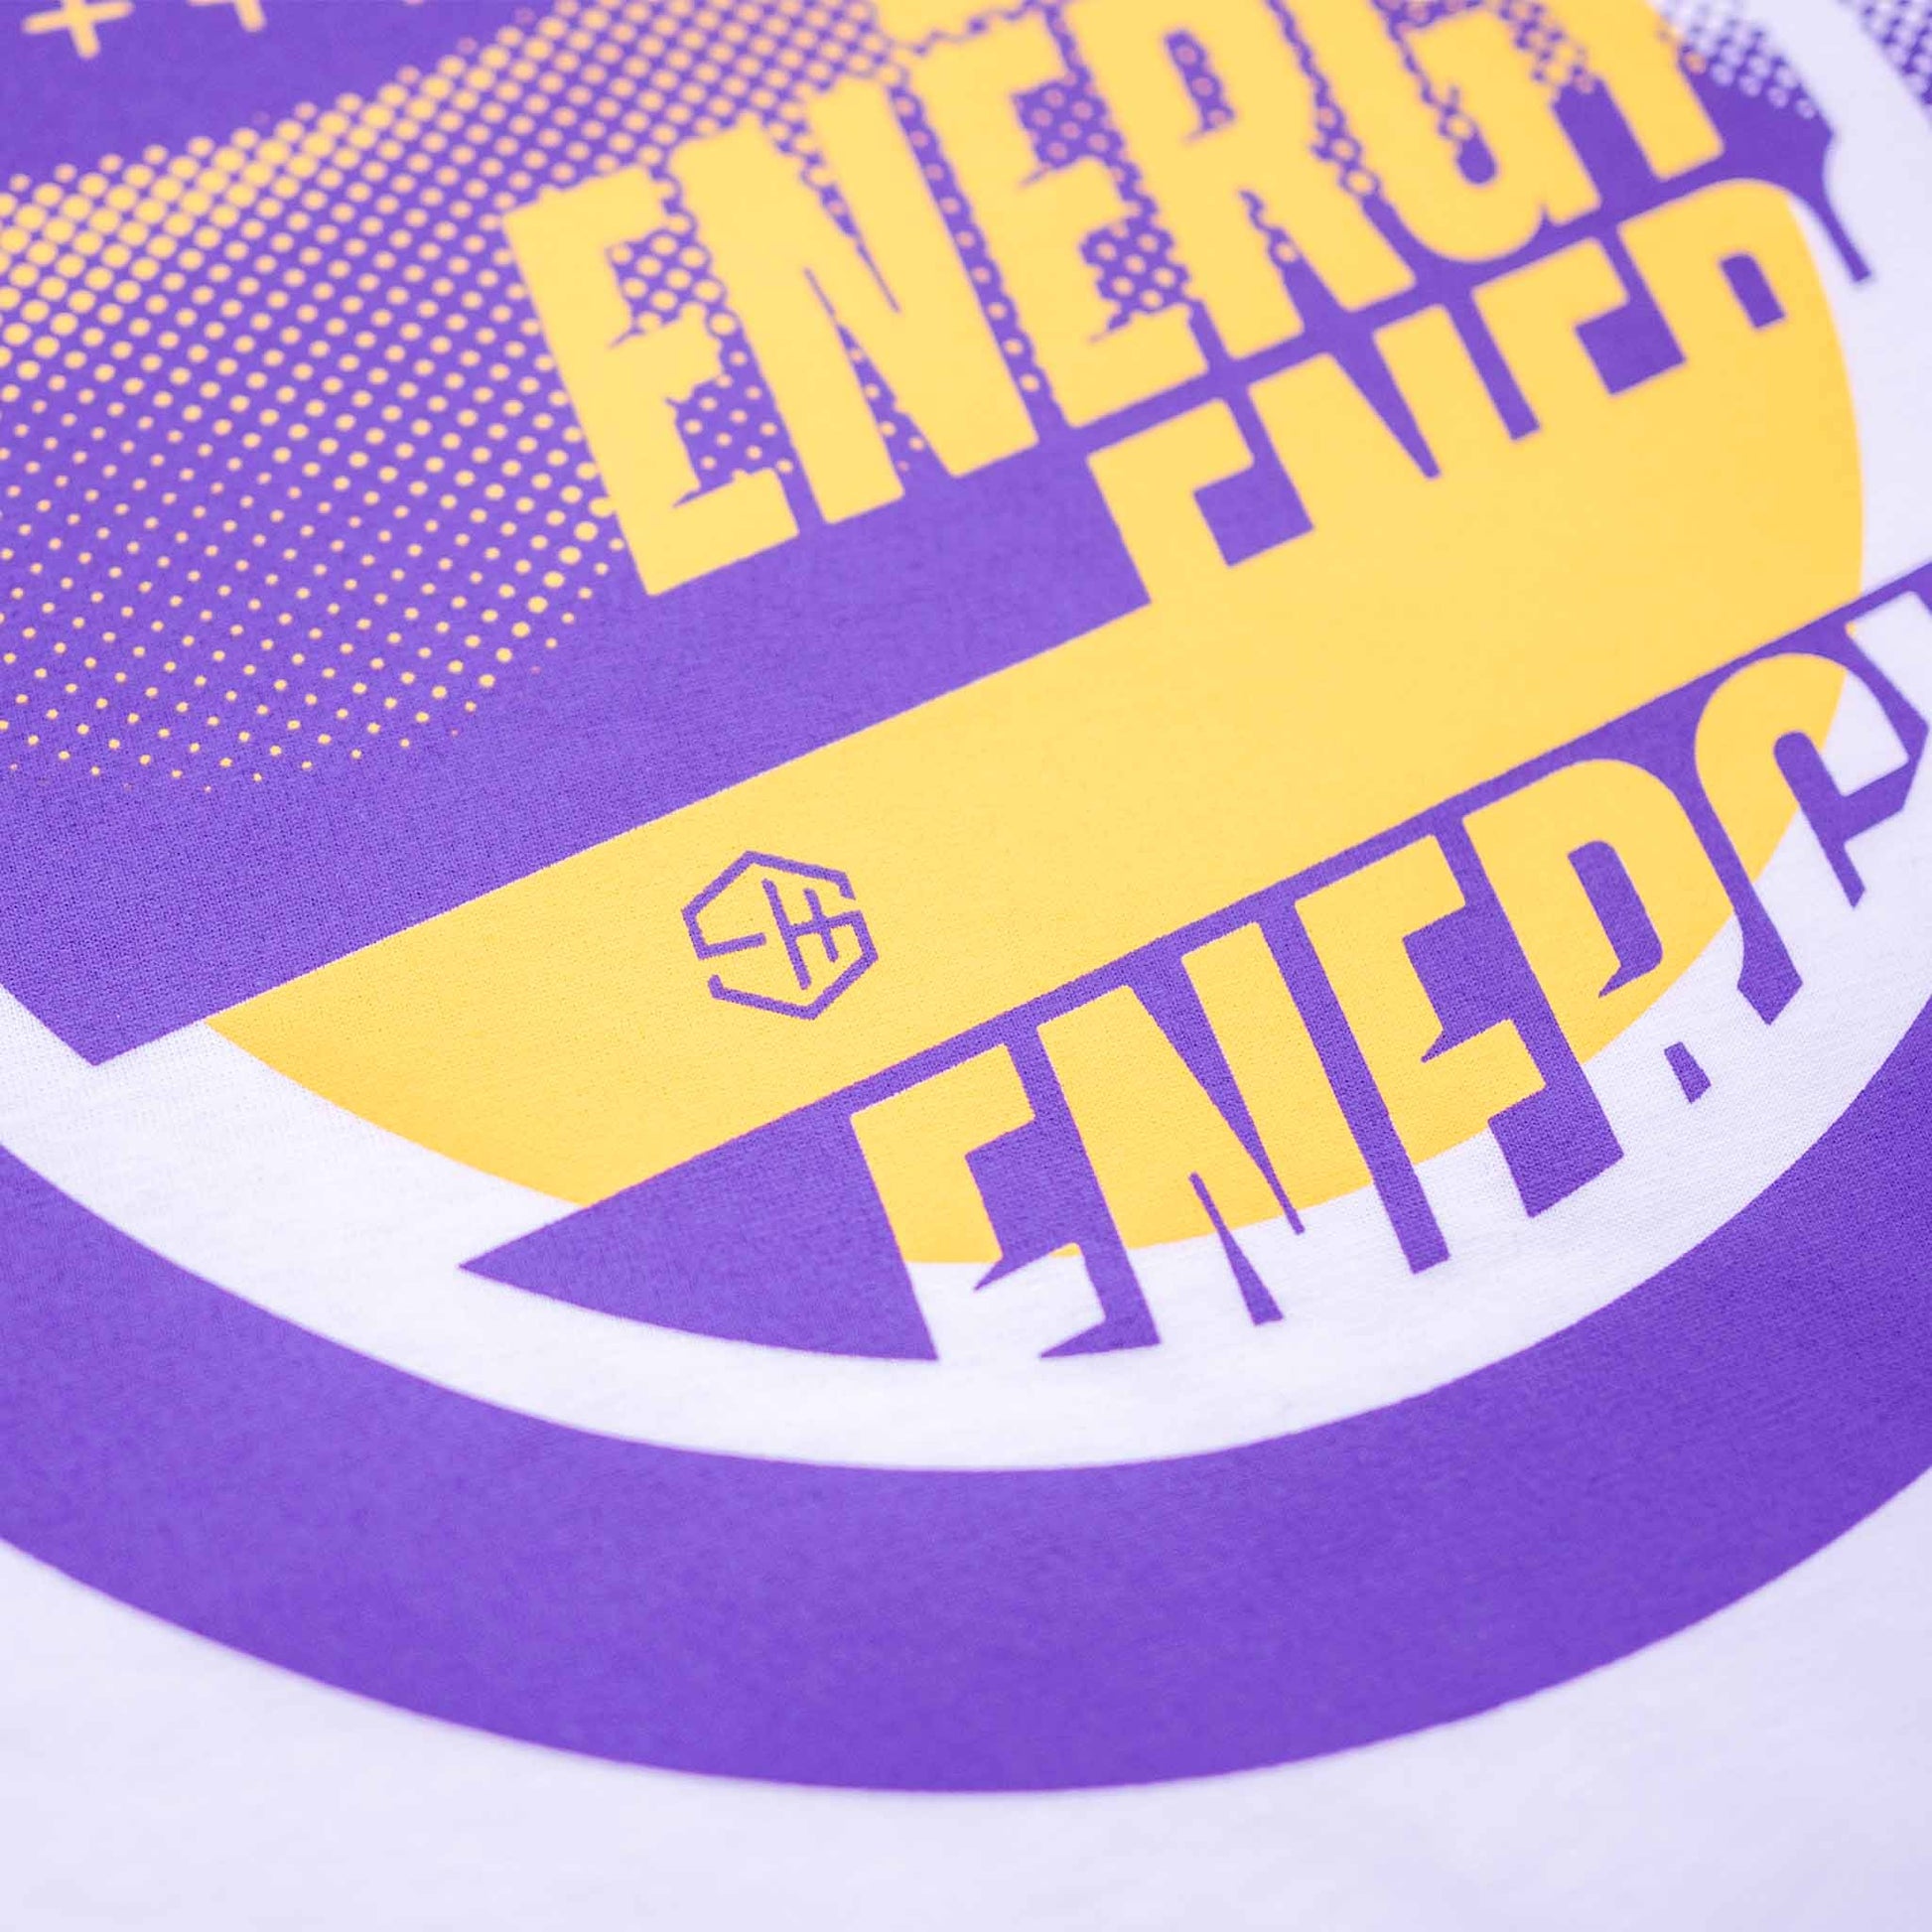 White Energy T-shirt with yellow and purple graphic